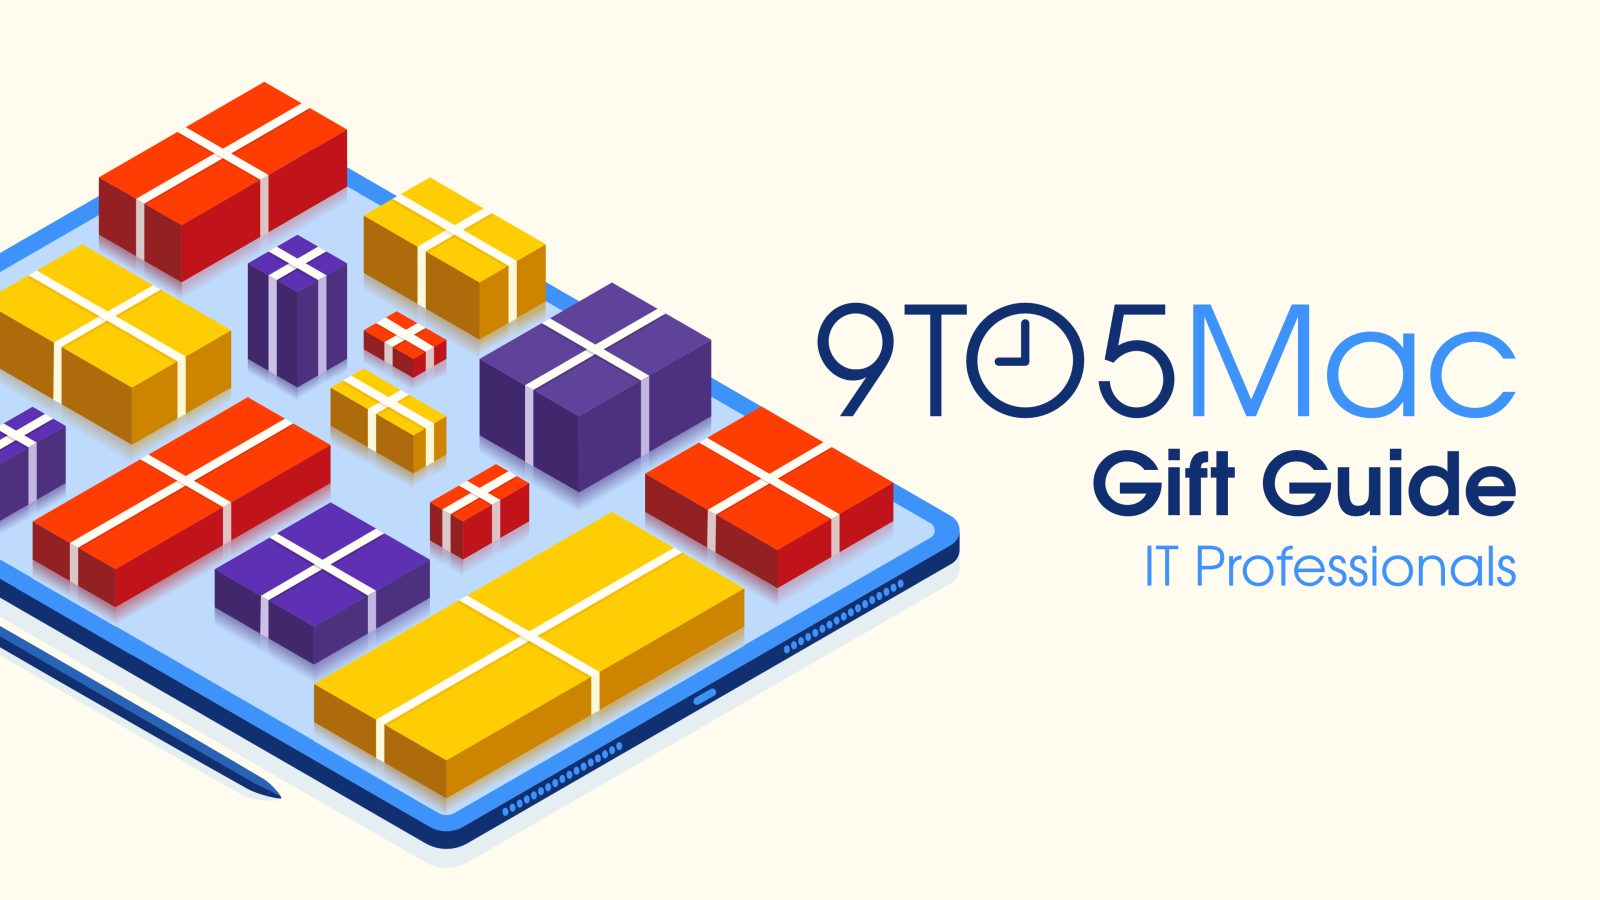 Gifts for IT professionals